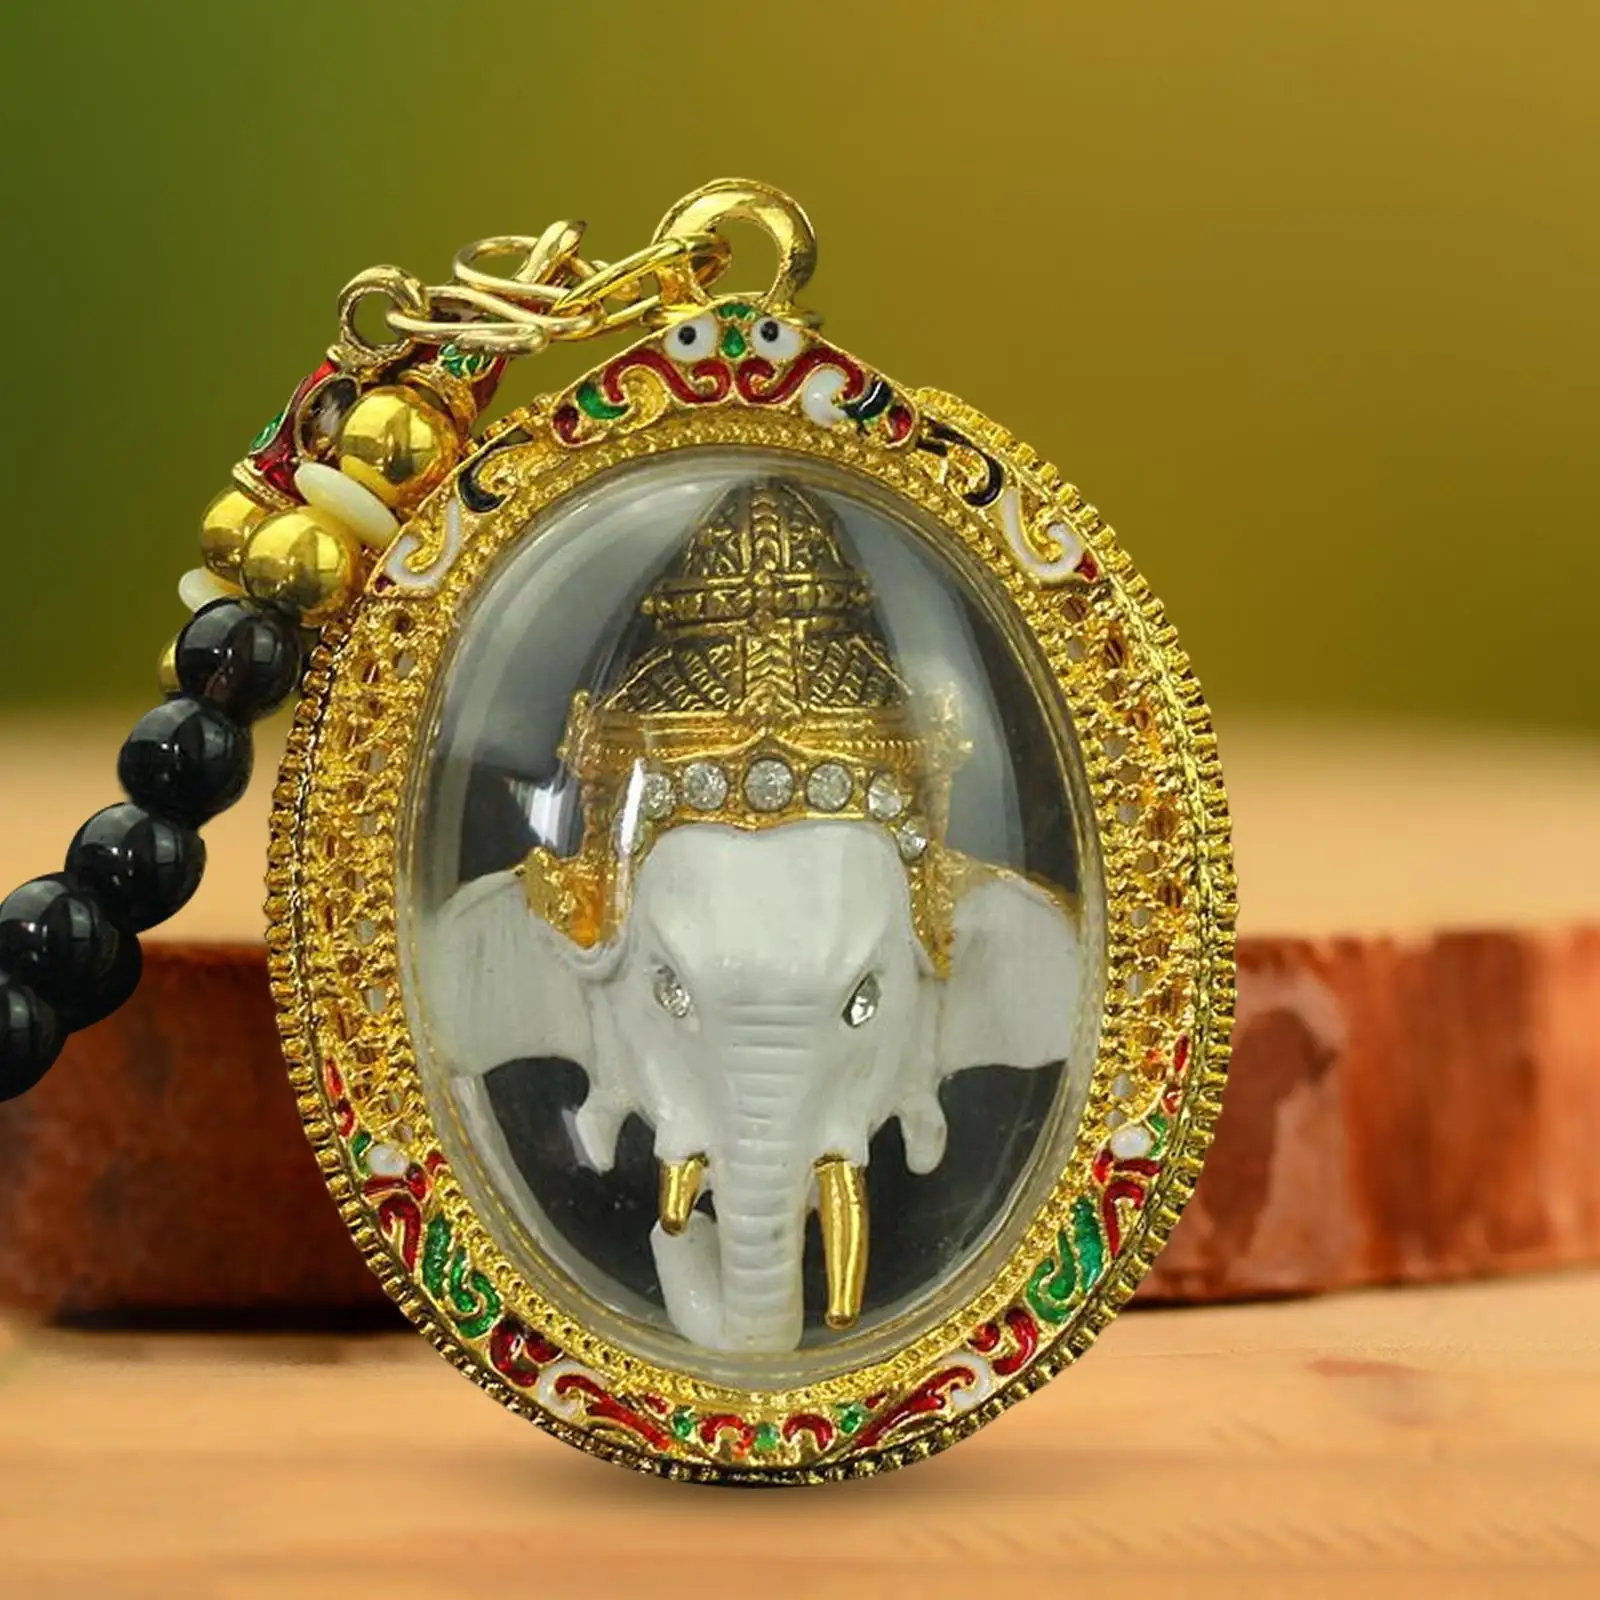 Thai Amulet Pendant  Statue Gold Plating Elephant God Thailand Southeast Asia  Necklace for Protection Good Luck